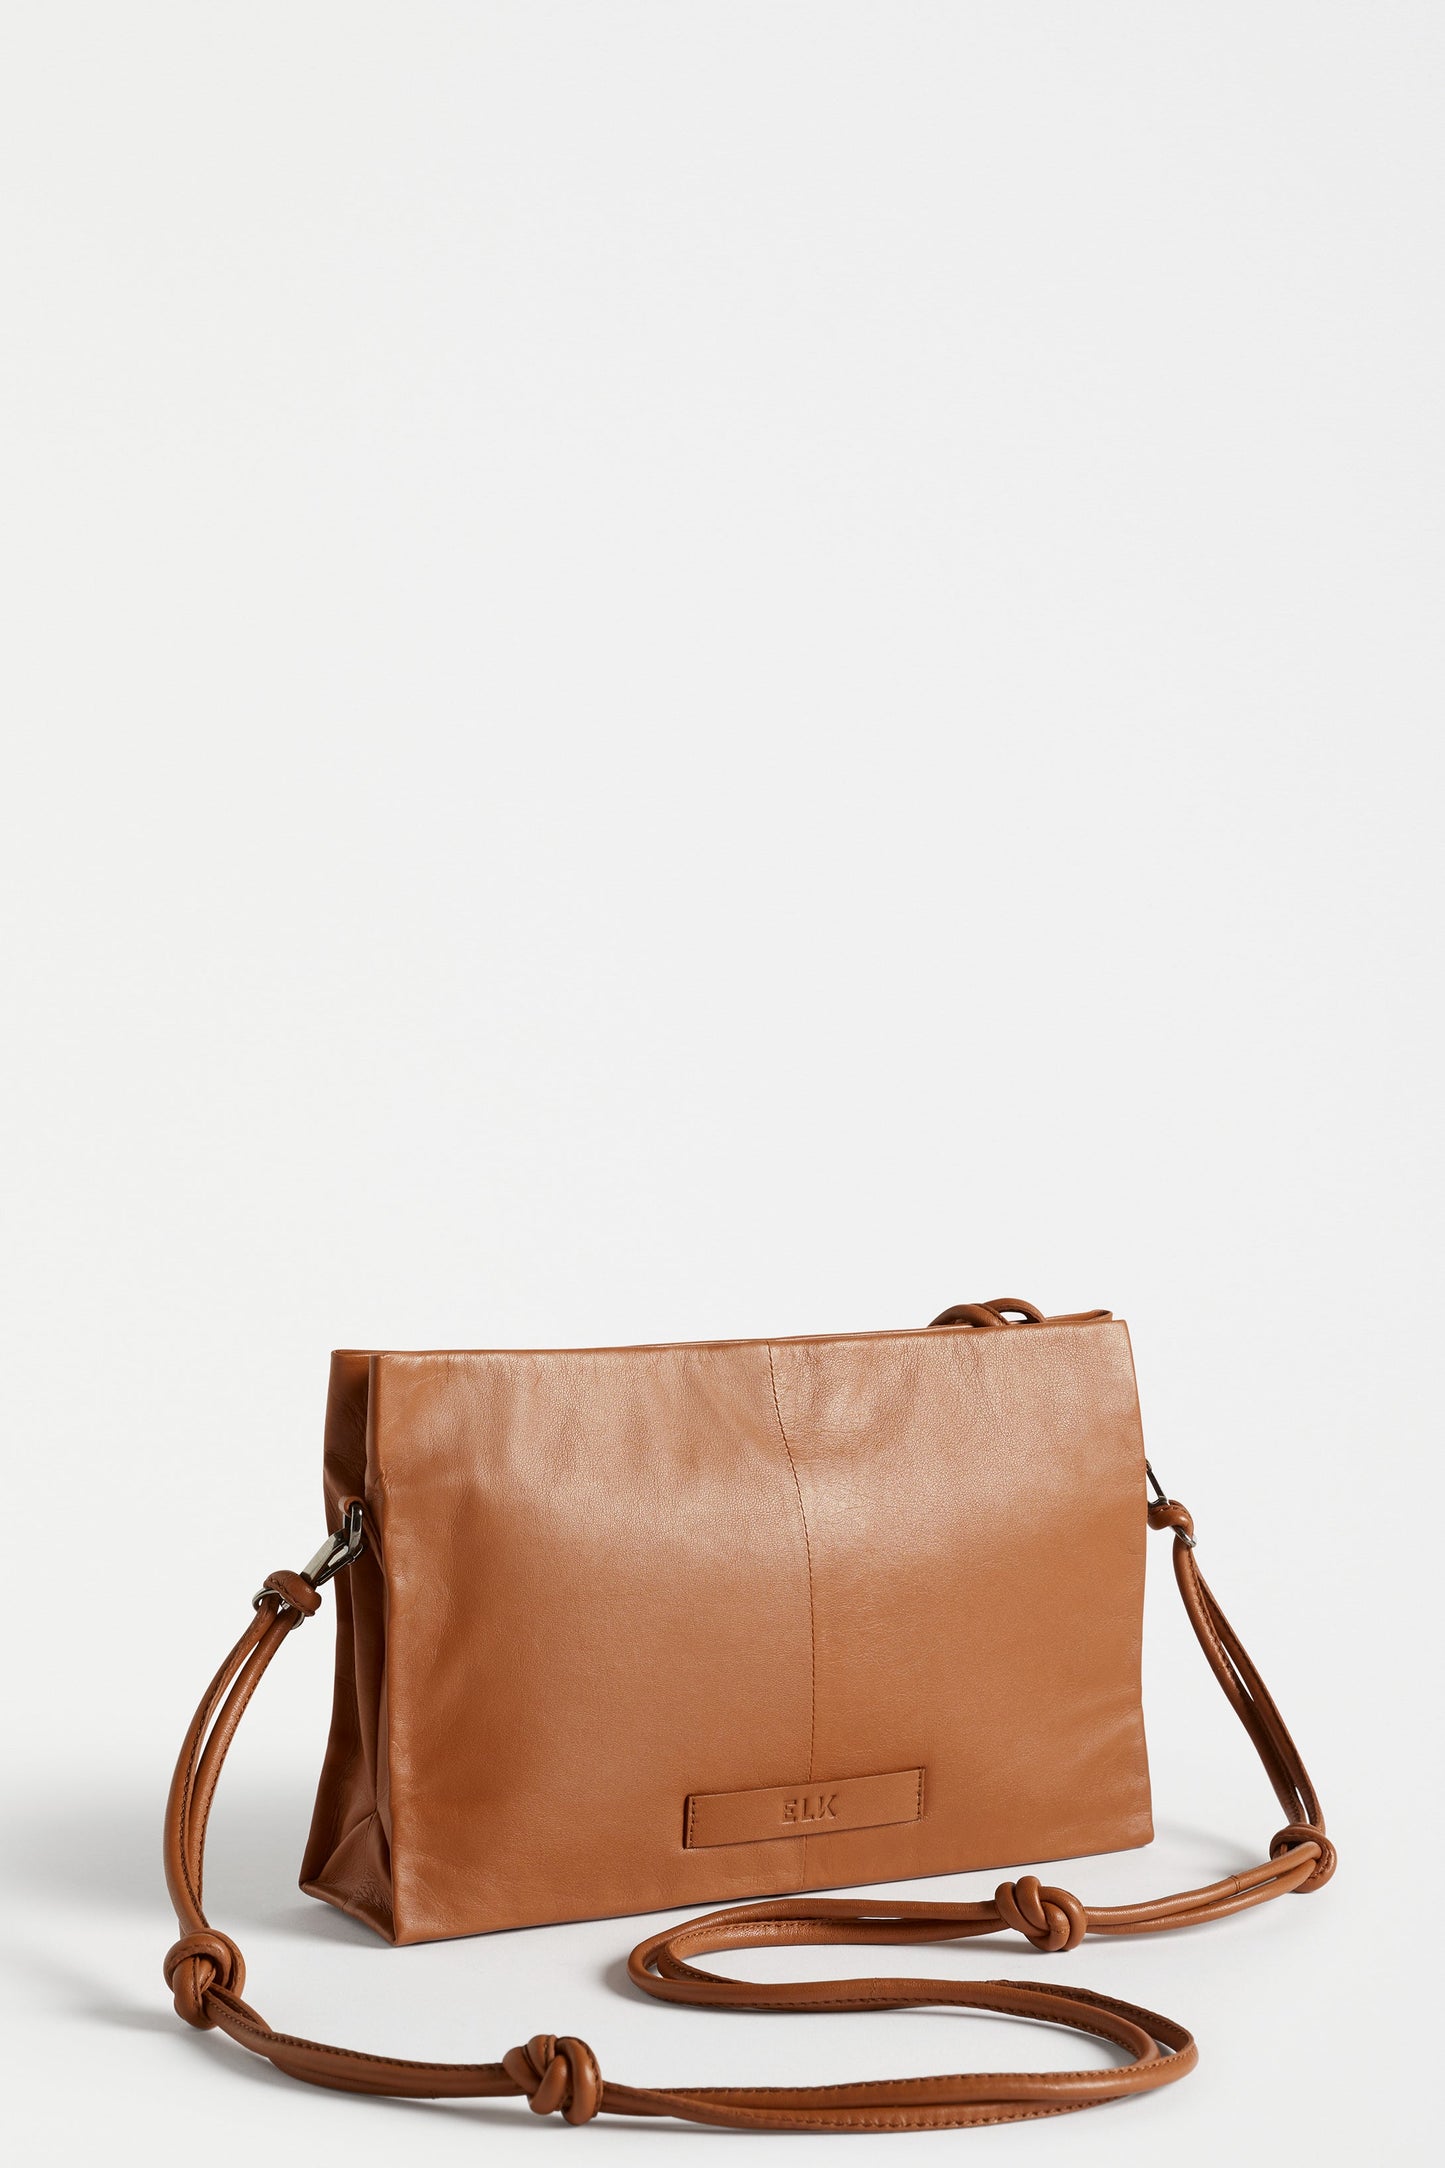 Malte Small Leather Cross Body Bag with Knot Detail Back | TAN